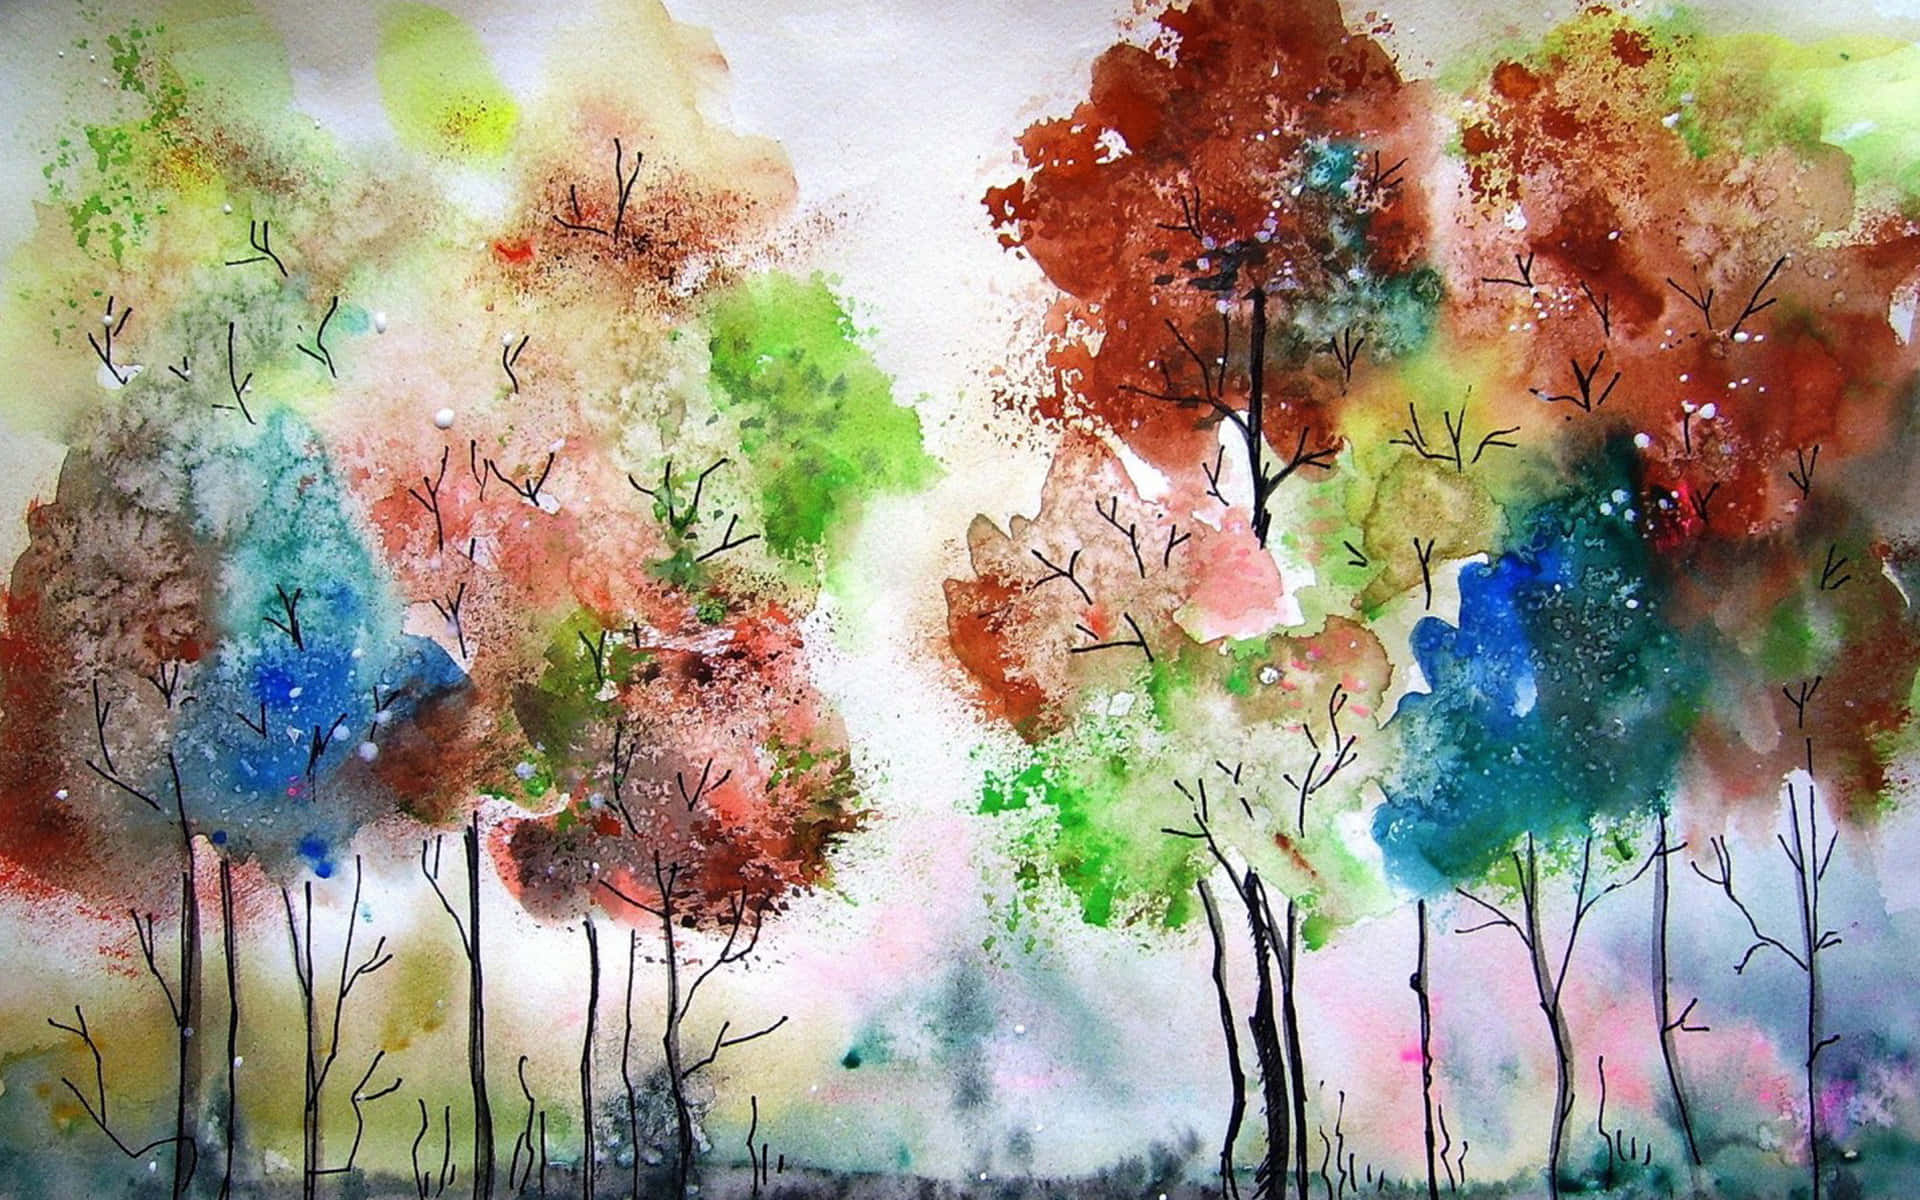 An enchanting and vibrant watercolor landscape